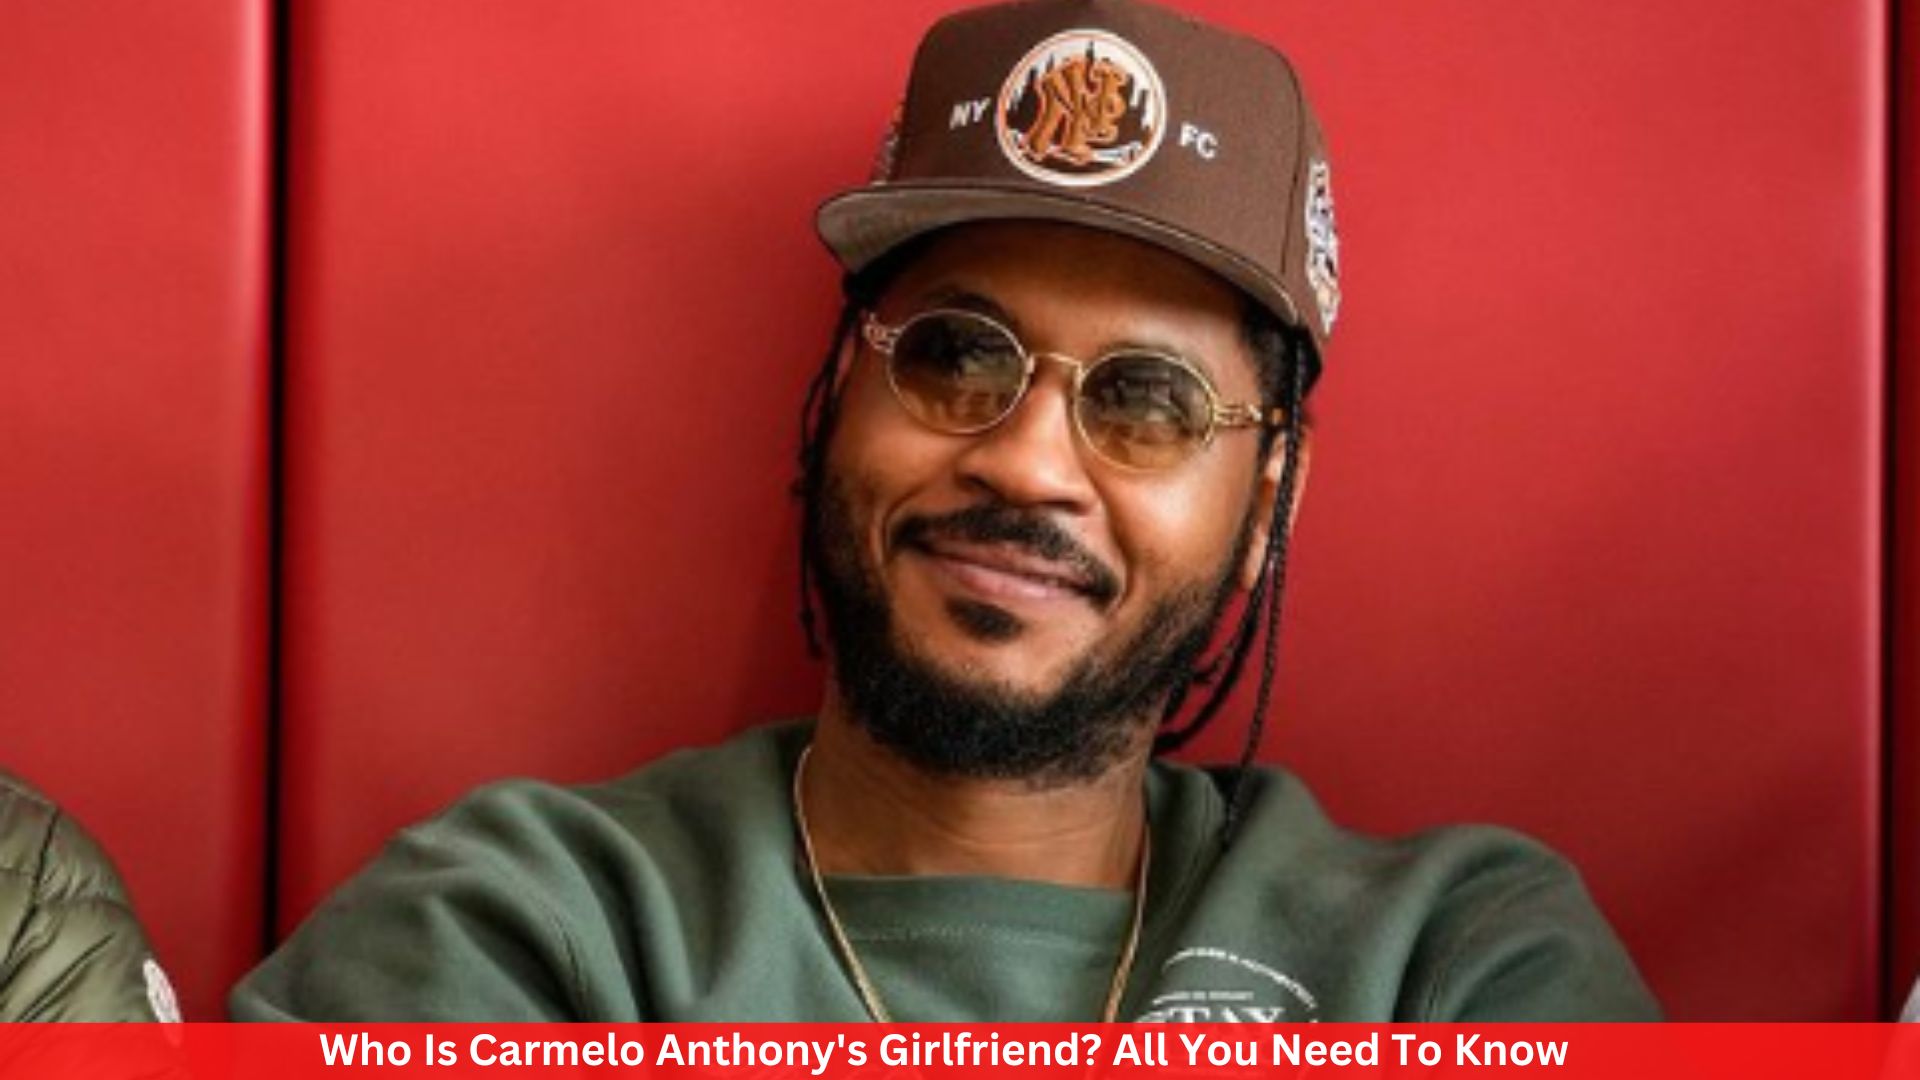 Who Is Carmelo Anthony's Girlfriend? All You Need To Know